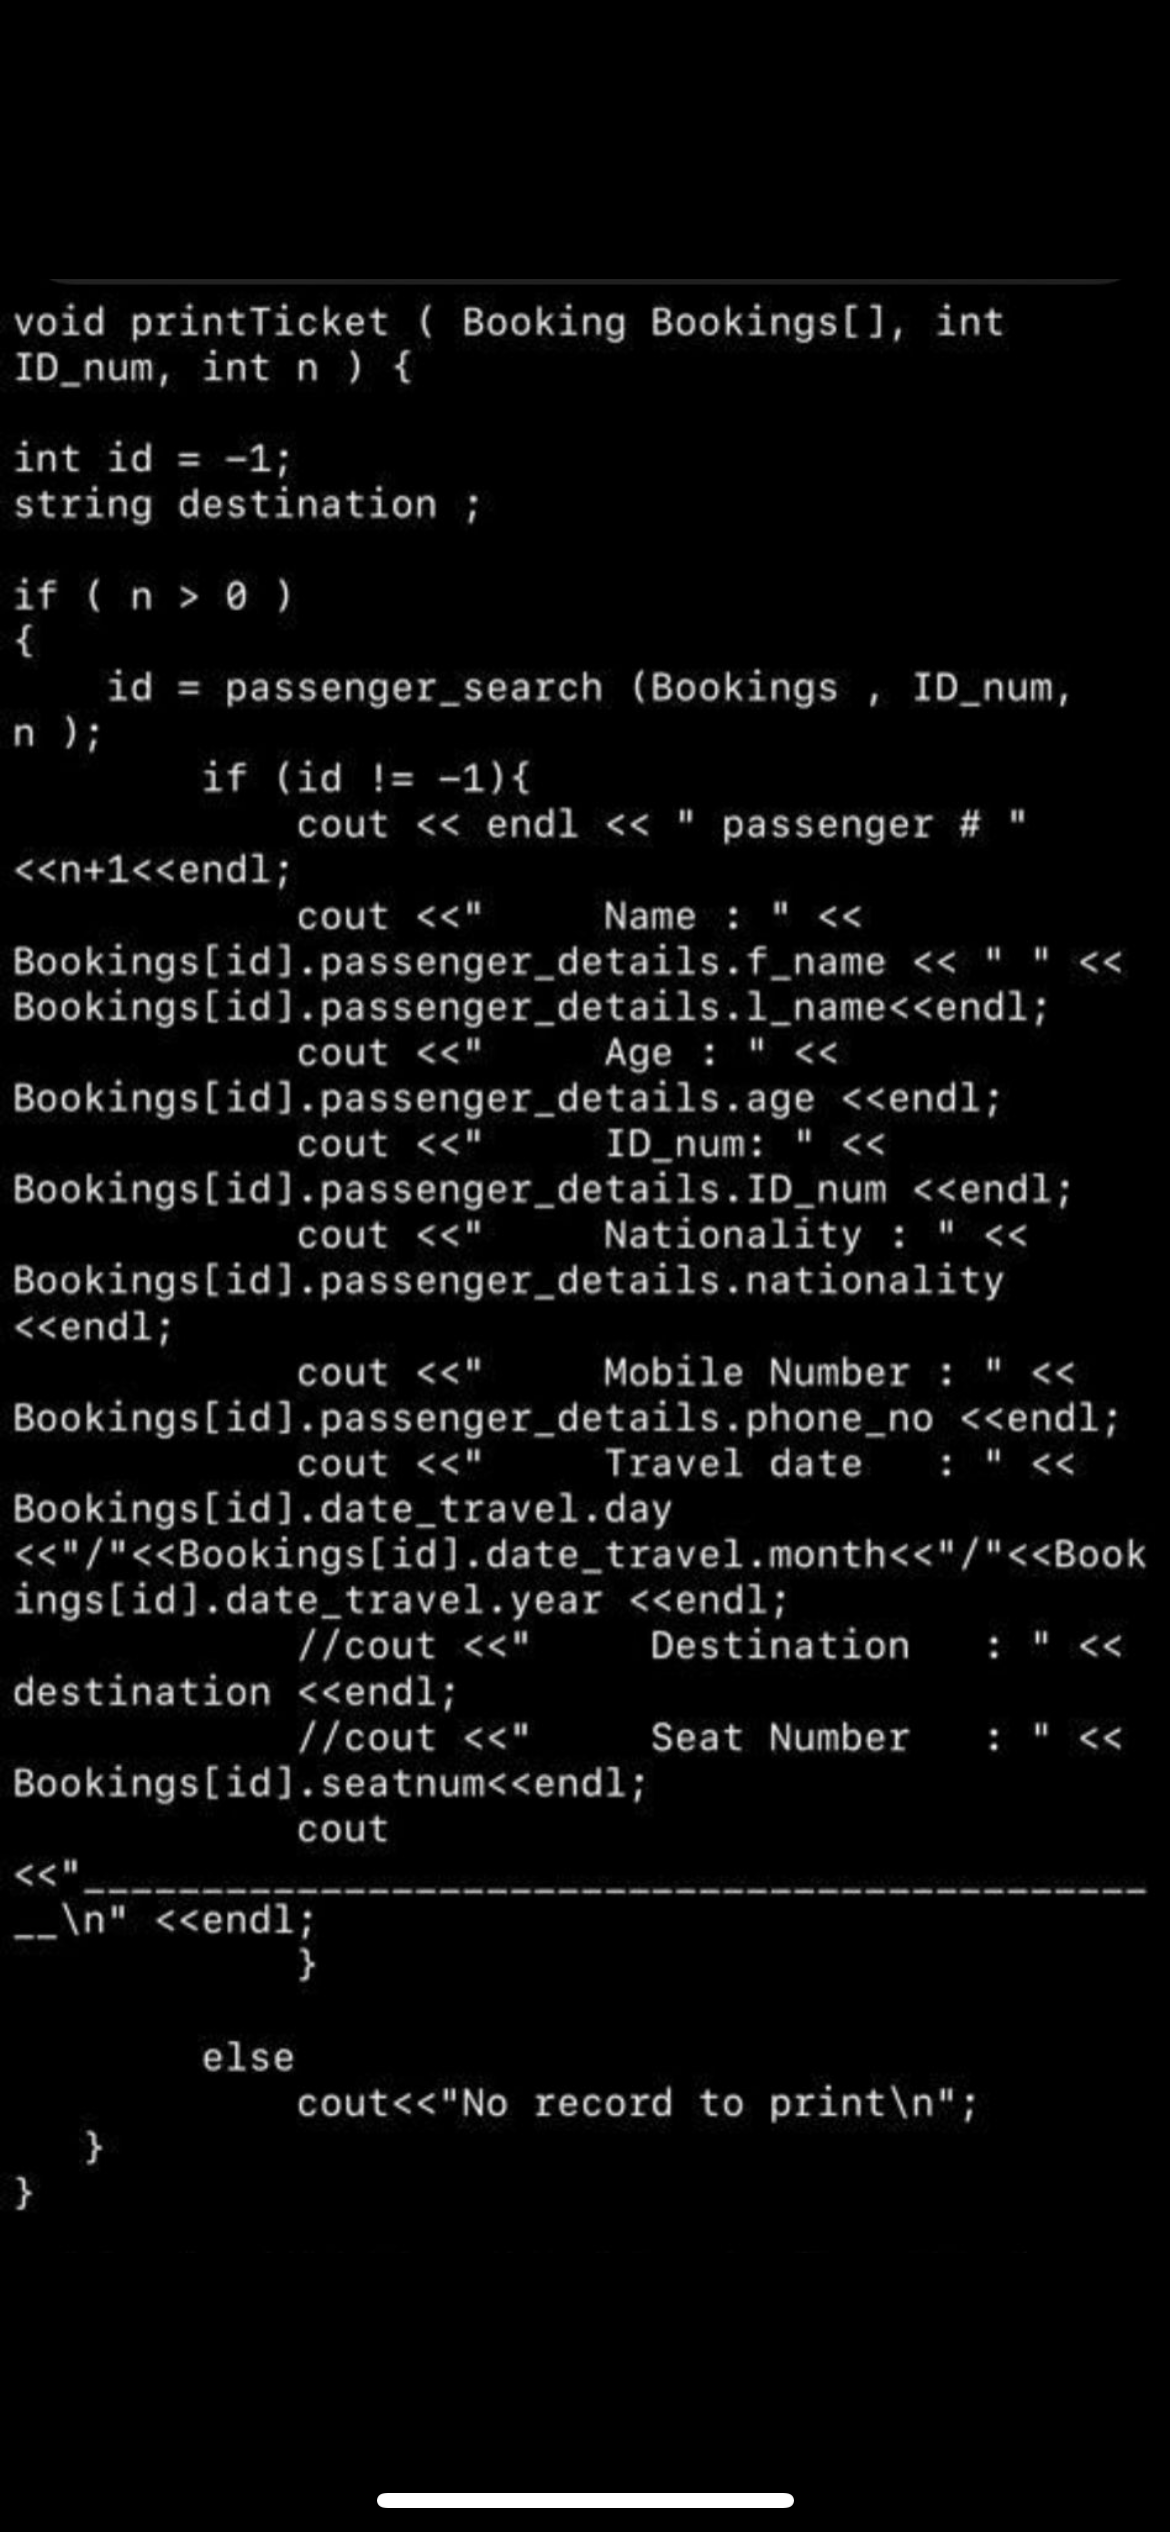 void printTicket ( Booking Bookings[], int
ID_num, int n ) {
int id = -1;
%3D
string destination ;
if ( n > 0 )
{
id = passenger_search (Bookings , ID_num,
n );
if (id != -1){
cout << endl <« " passenger # "
<<n+1<<end1;
cout <<"
Name : " <
Bookings[id].passenger_details.f_name << " " <«
Bookings[id].passenger_details.1_name<<endl;
cout <<"
Age : " <<
Bookings[id].passenger_details.age <endl;
cout <<"
ID_num: " <<
Bookings[id].passenger_details.ID_num <<endl;
cout <<"
Nationality : " <<
Bookings[id].passenger_details.nationality
<<endl;
cout <<"
Mobile Number : " <<
Bookings[id].passenger_details.phone_no <<endl;
: " <<
cout <<"
Travel date
Bookings[id].date_travel.day
<<"/"<<Bookings[id].date_travel.month<<"/"<<Book
ings[id].date_travel.year <<endl;
//cout <<"
Destination
: " <<
destination <<endl;
//cout <<"
Seat Number
: " <<
Bookings[id].seatnum<<endl;
cout
<<"
_\n" <<endl;
else
cout<<"No record to print\n";
}
}
